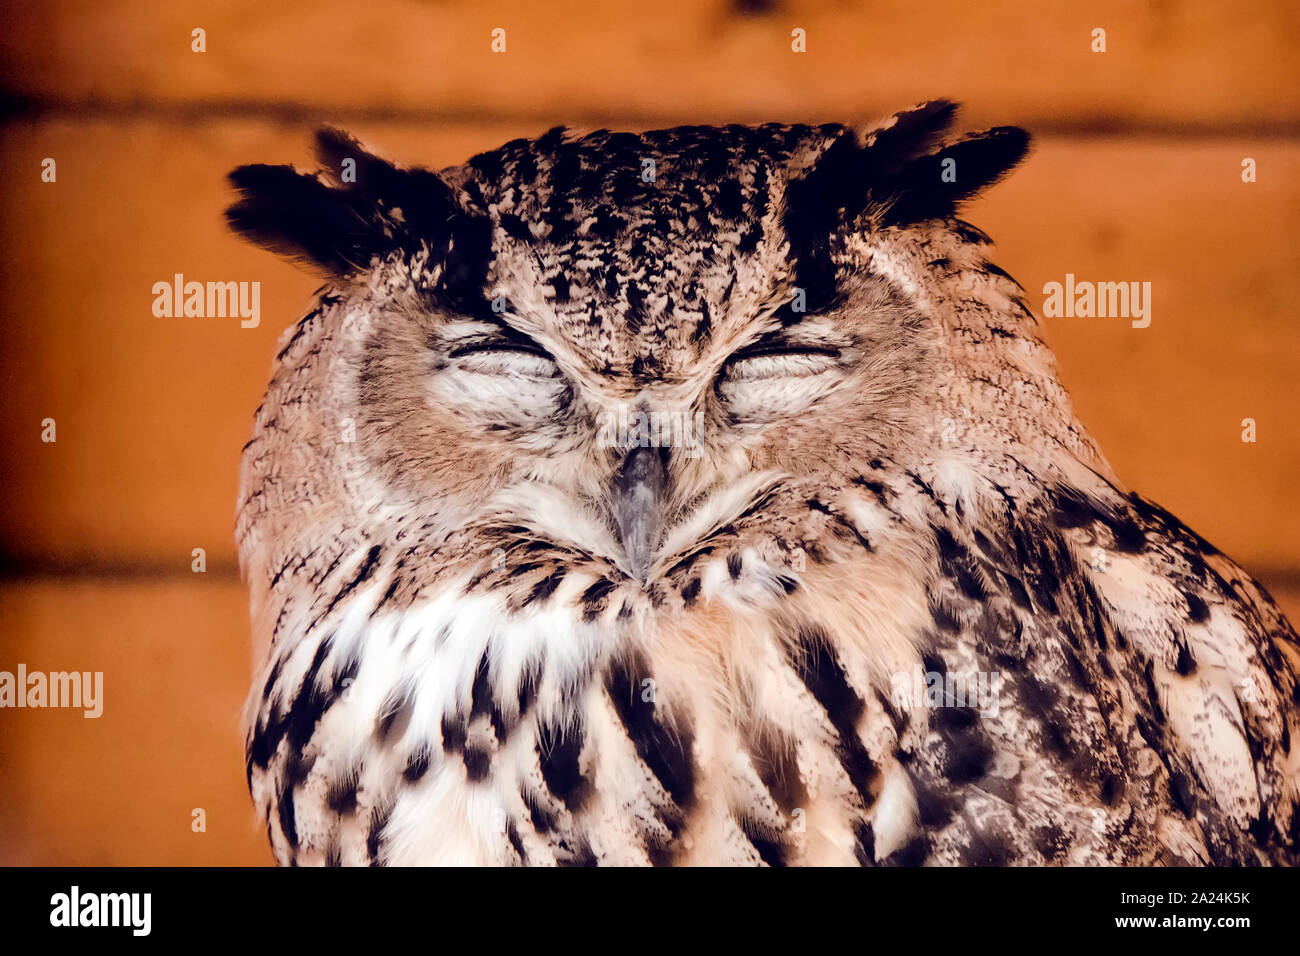 Great horned owl standing with eyes closed. Head of a sleeping owl closeup Stock Photo